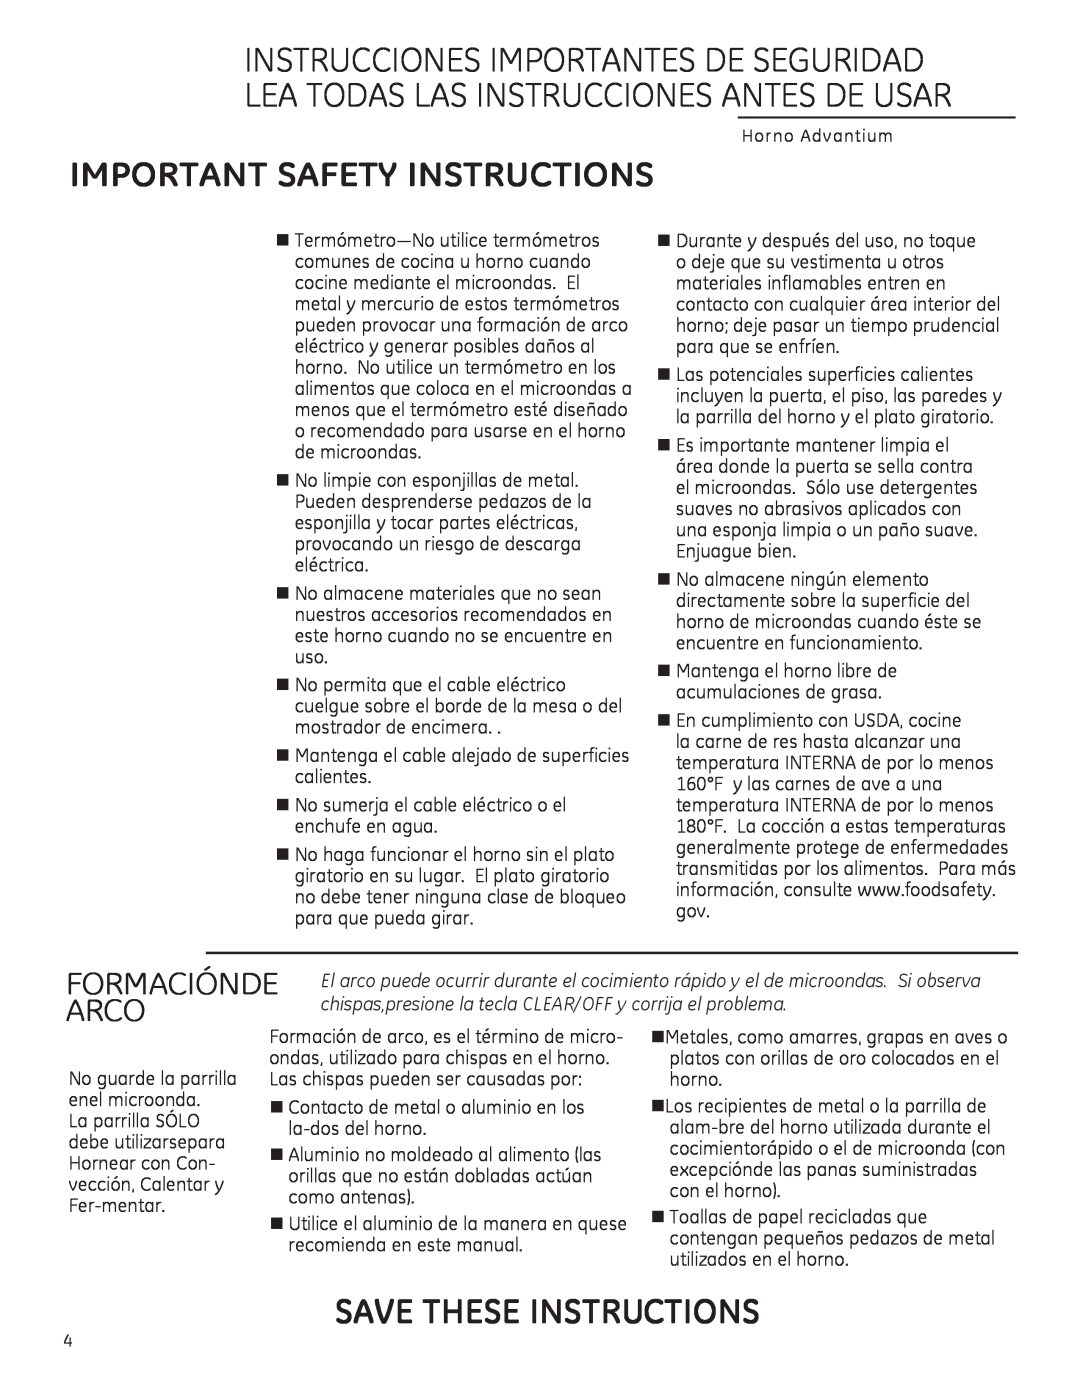 GE CSA1201 Important Safety Instructions, Save These Instructions, Arco, Formaciónde, No guarde la parrilla, horno 